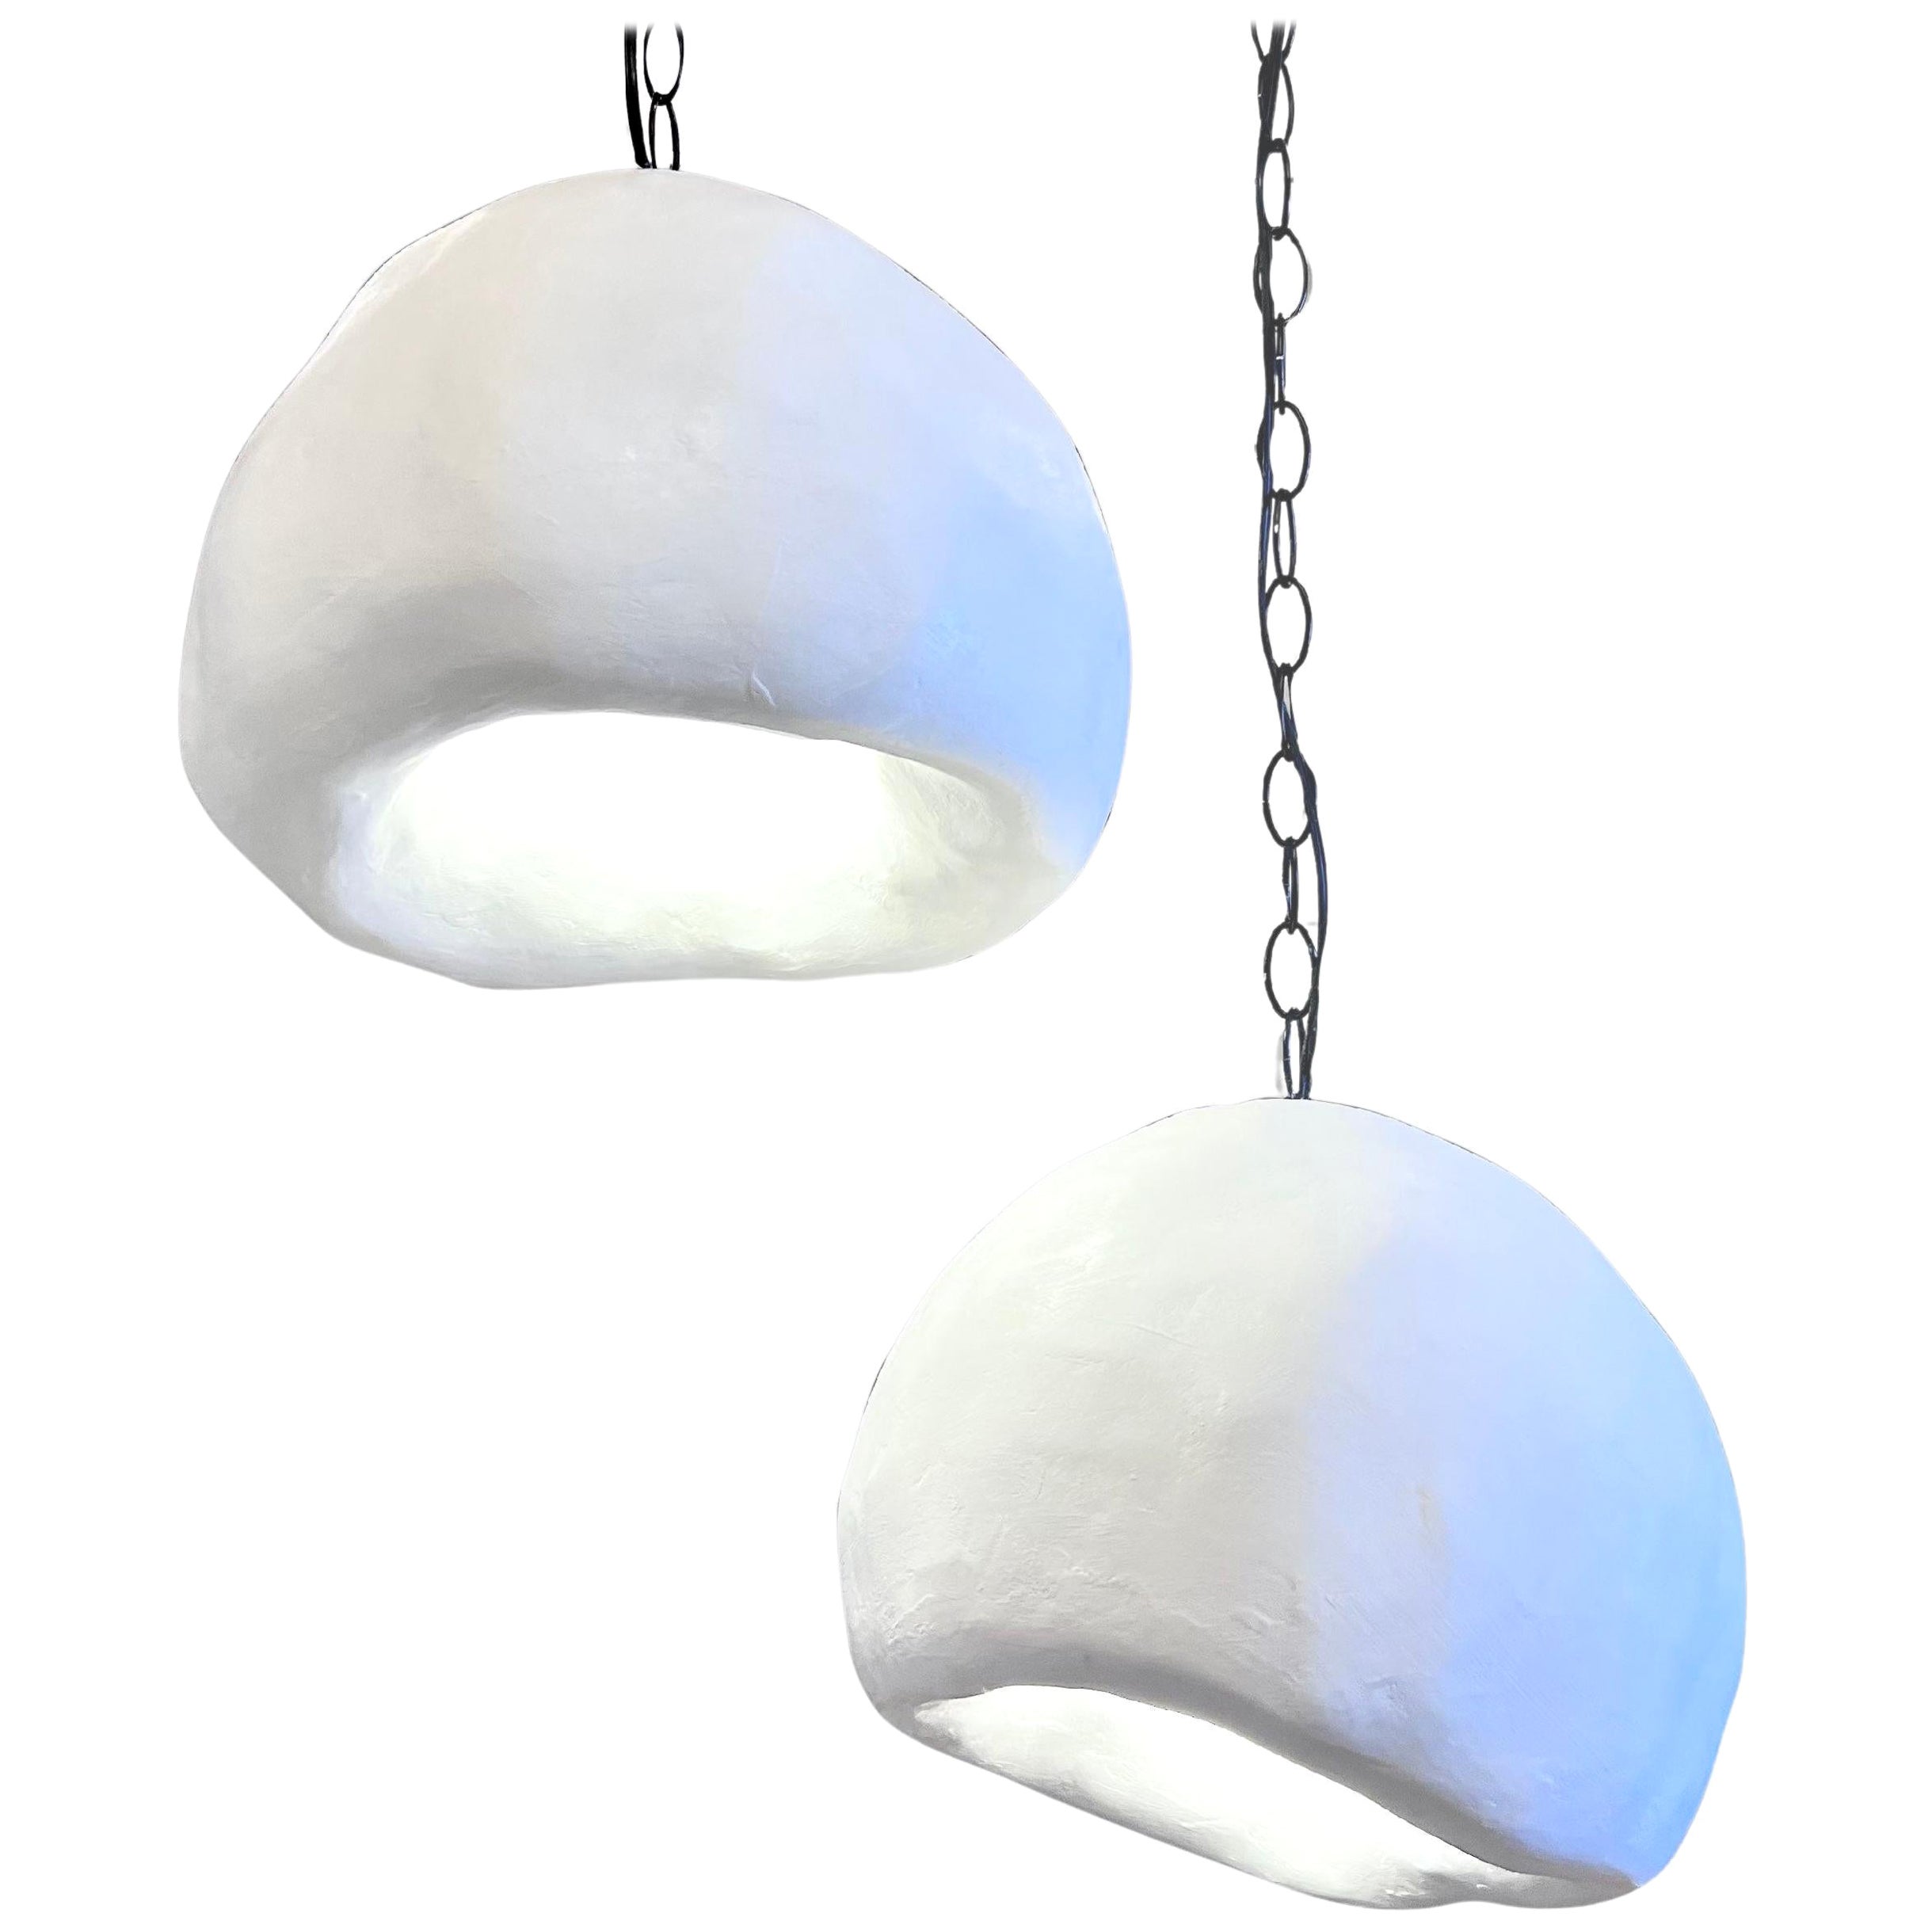 Biomorphic Pendant by Studio Chora, Organic Hanging Light Fixture, Made-to-order For Sale